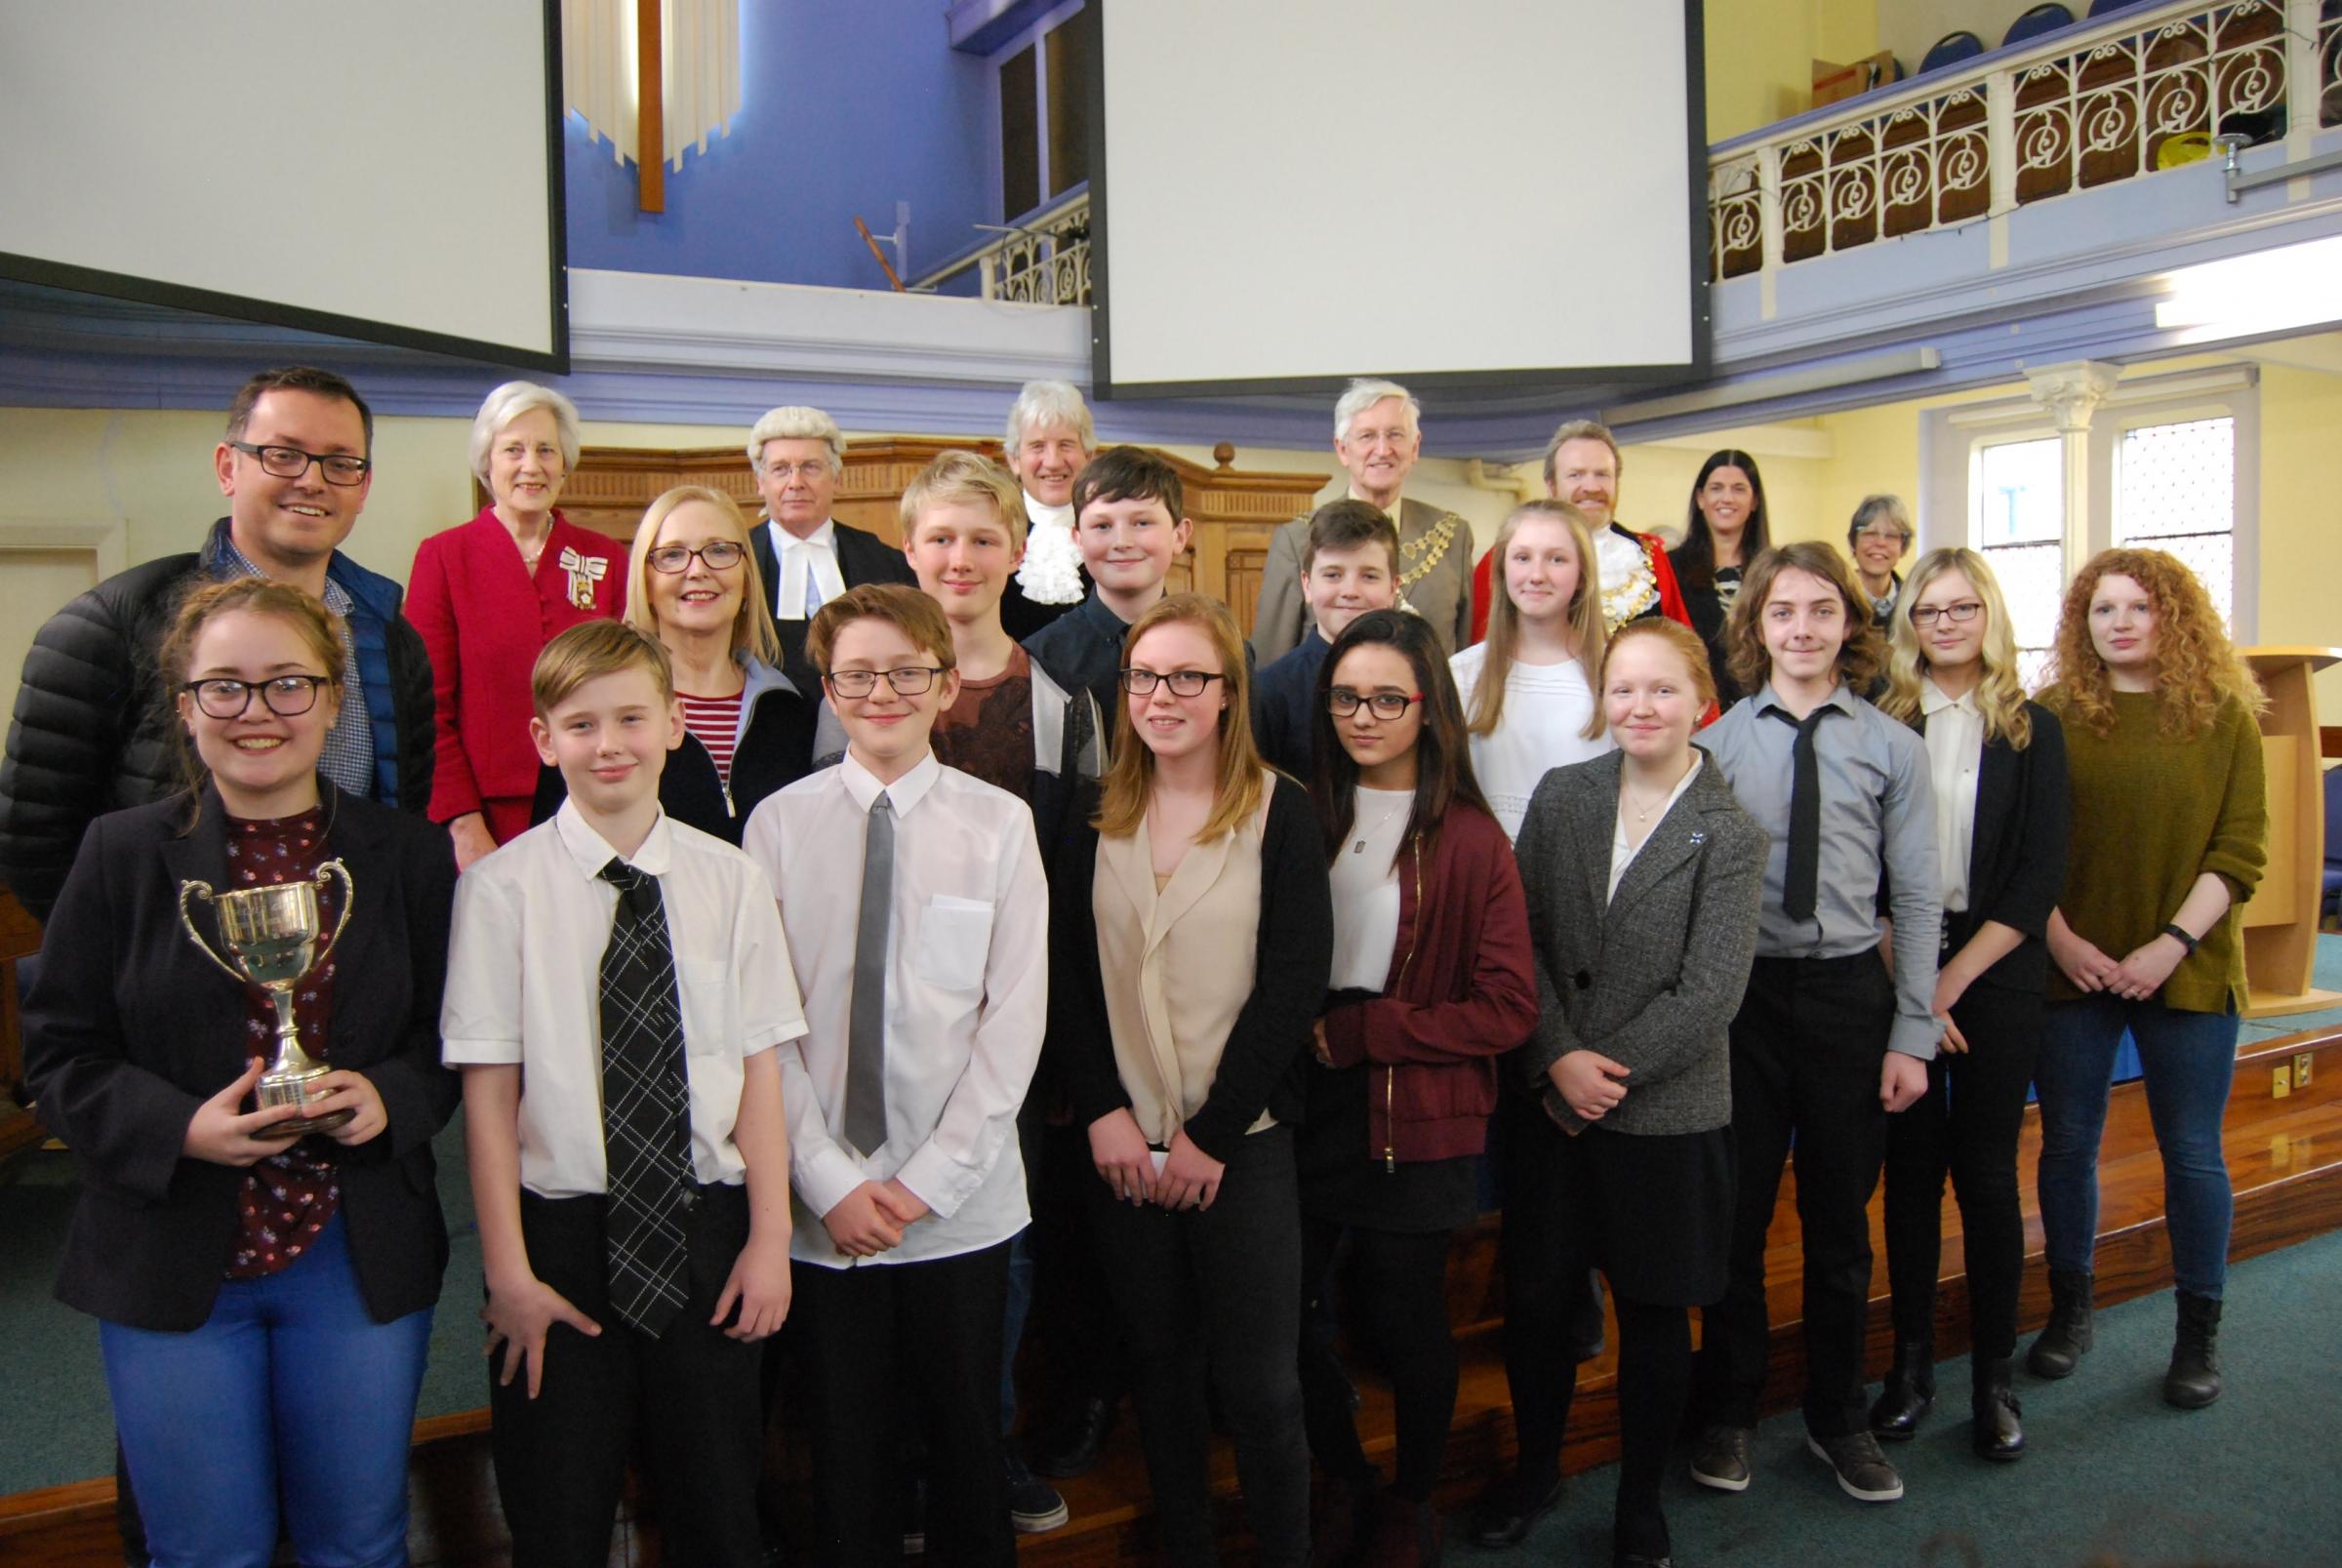 Students take on roles of defendants, magistrates, lawyers and court staff in mock trial competition